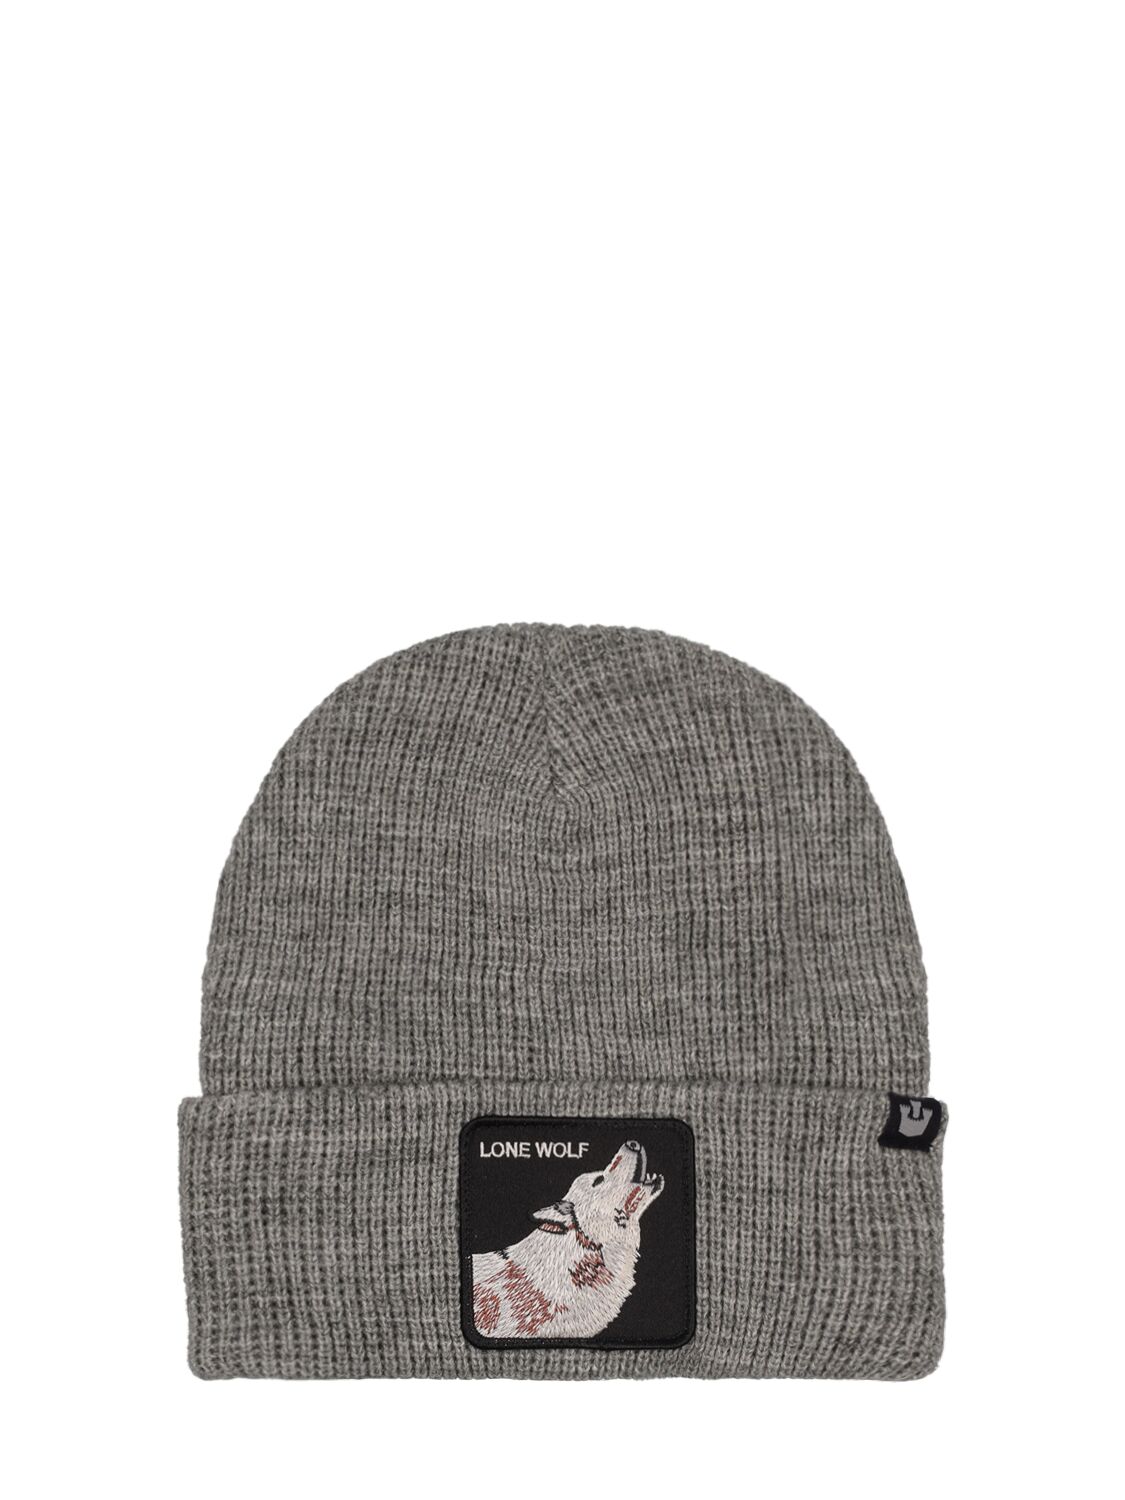 Image of Singled Out Knit Beanie